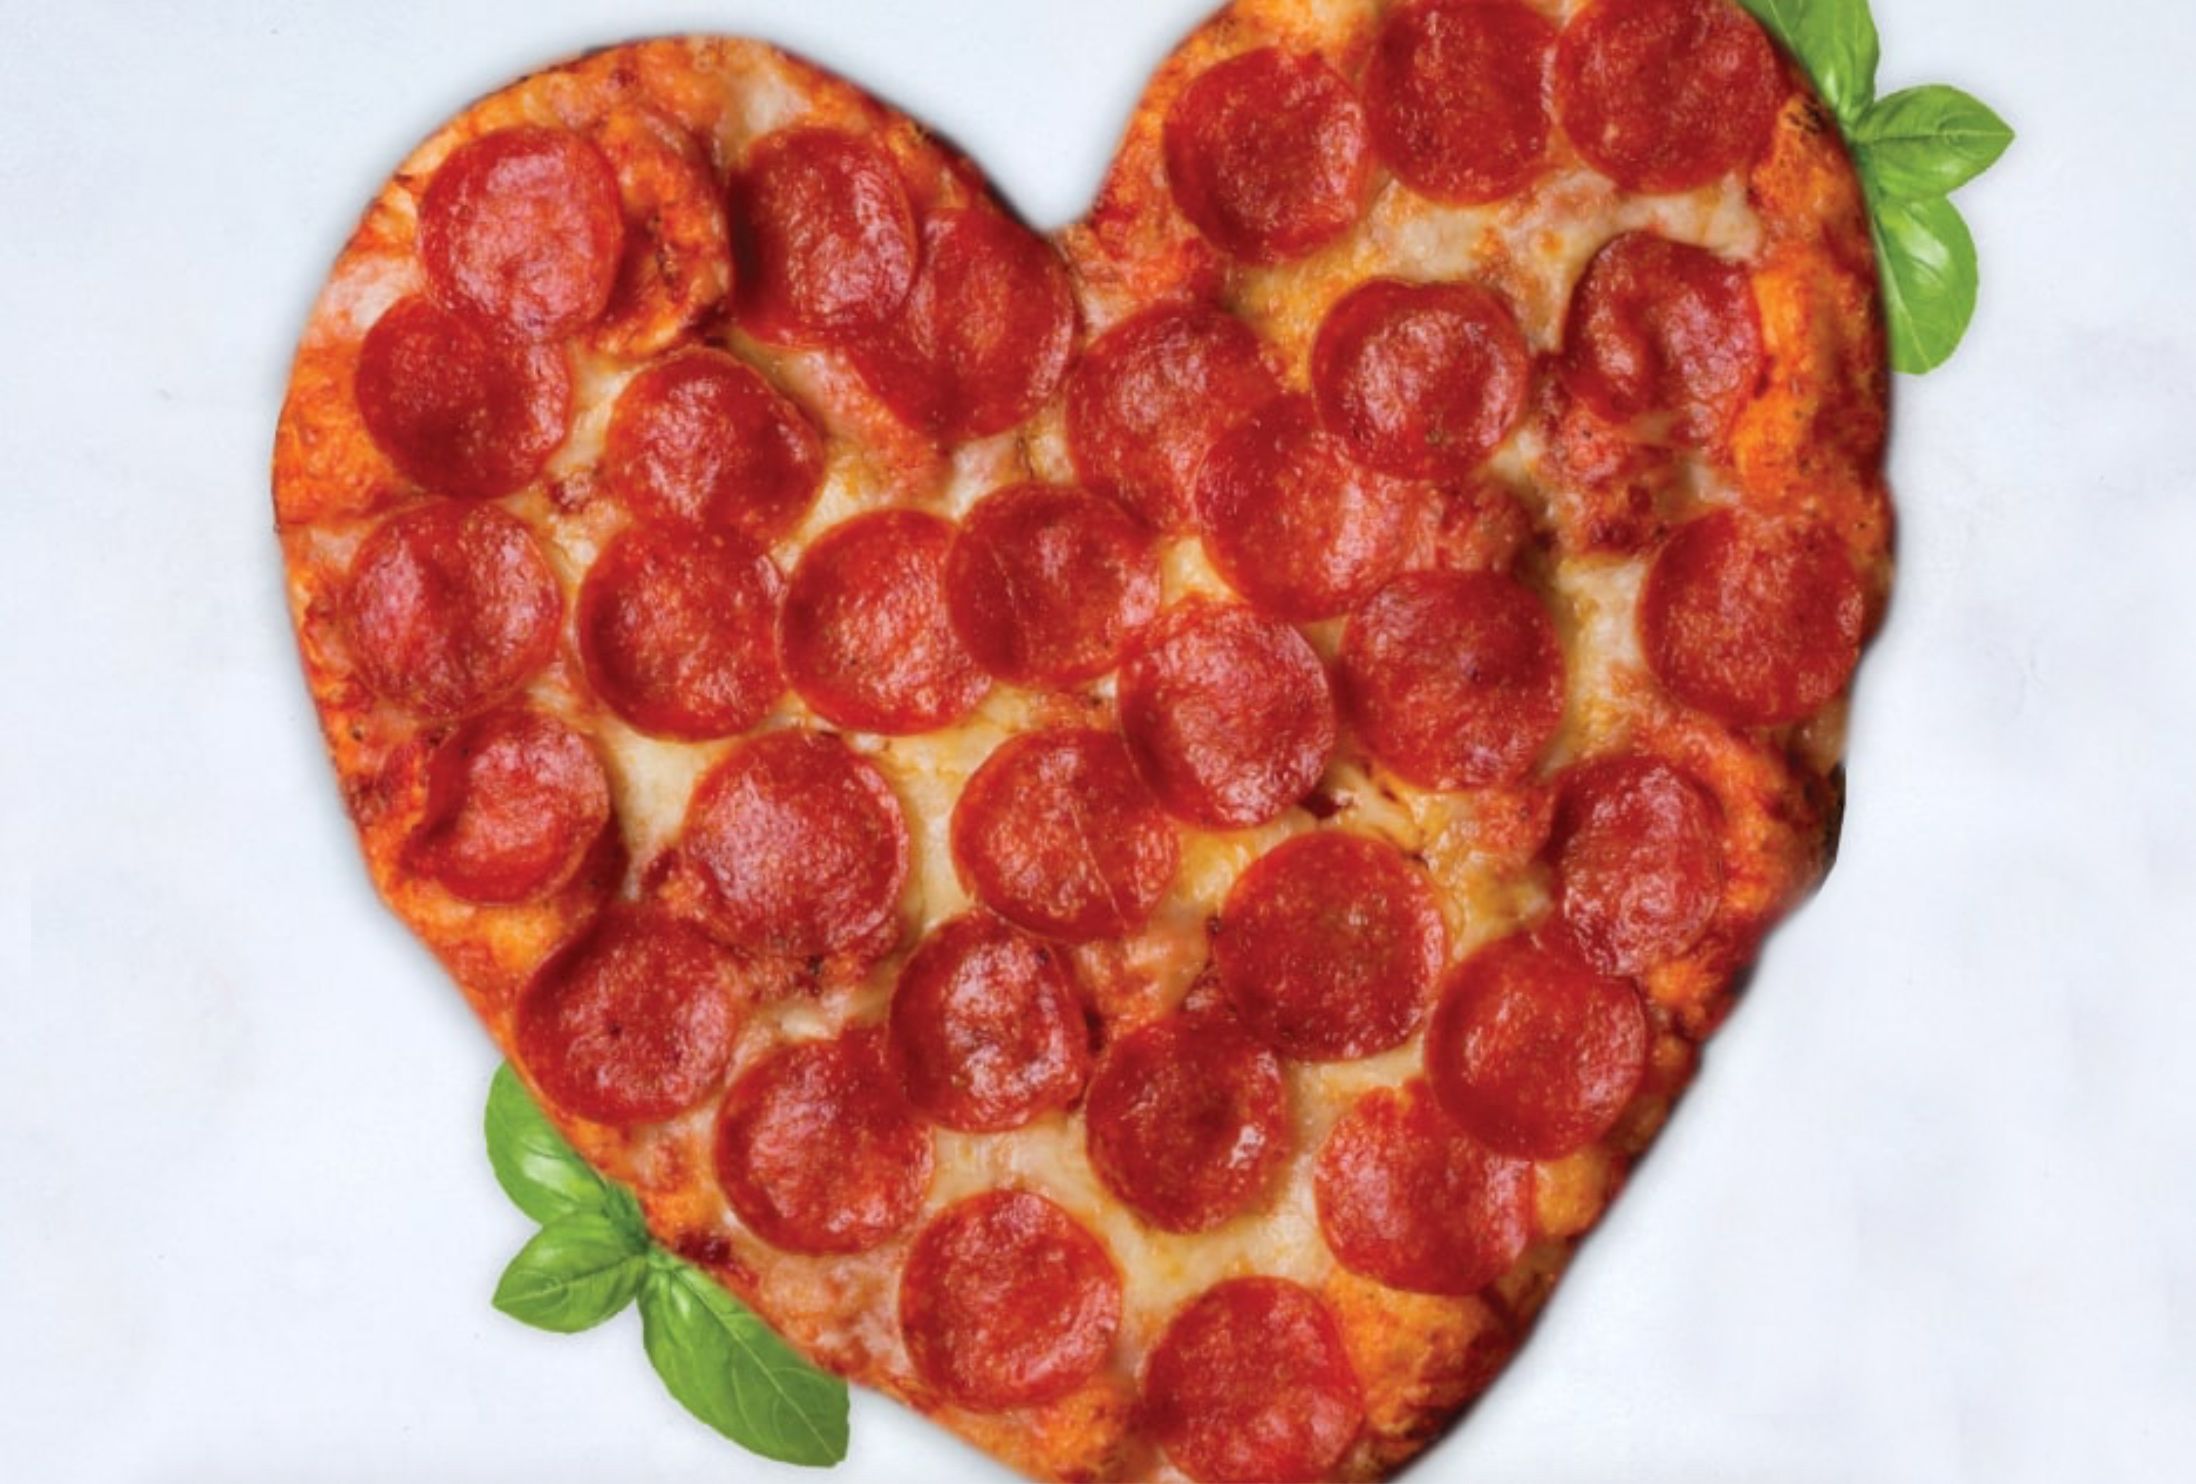 Shakey's Pizza Welcomes Back their $12 Seasonal Heart-Shaped Pizza Through to Valentine's Day